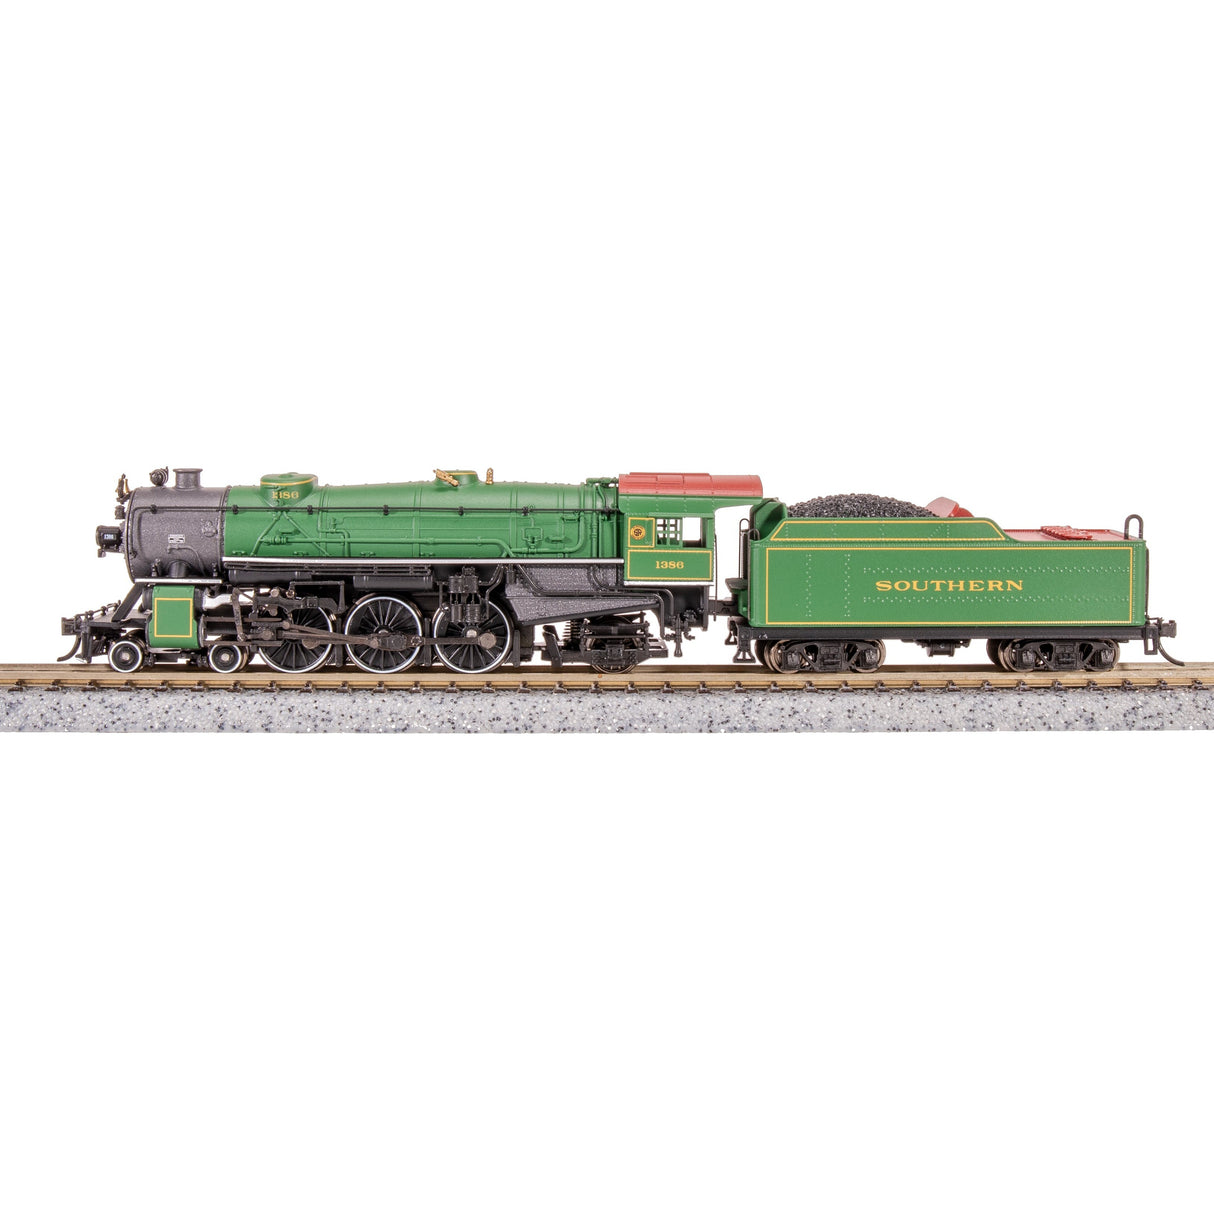 Broadway Limited N Scale USRA 4-6-2 Hvy.Pacific Steam Locomotive Southern #1391/grn DC/DCC